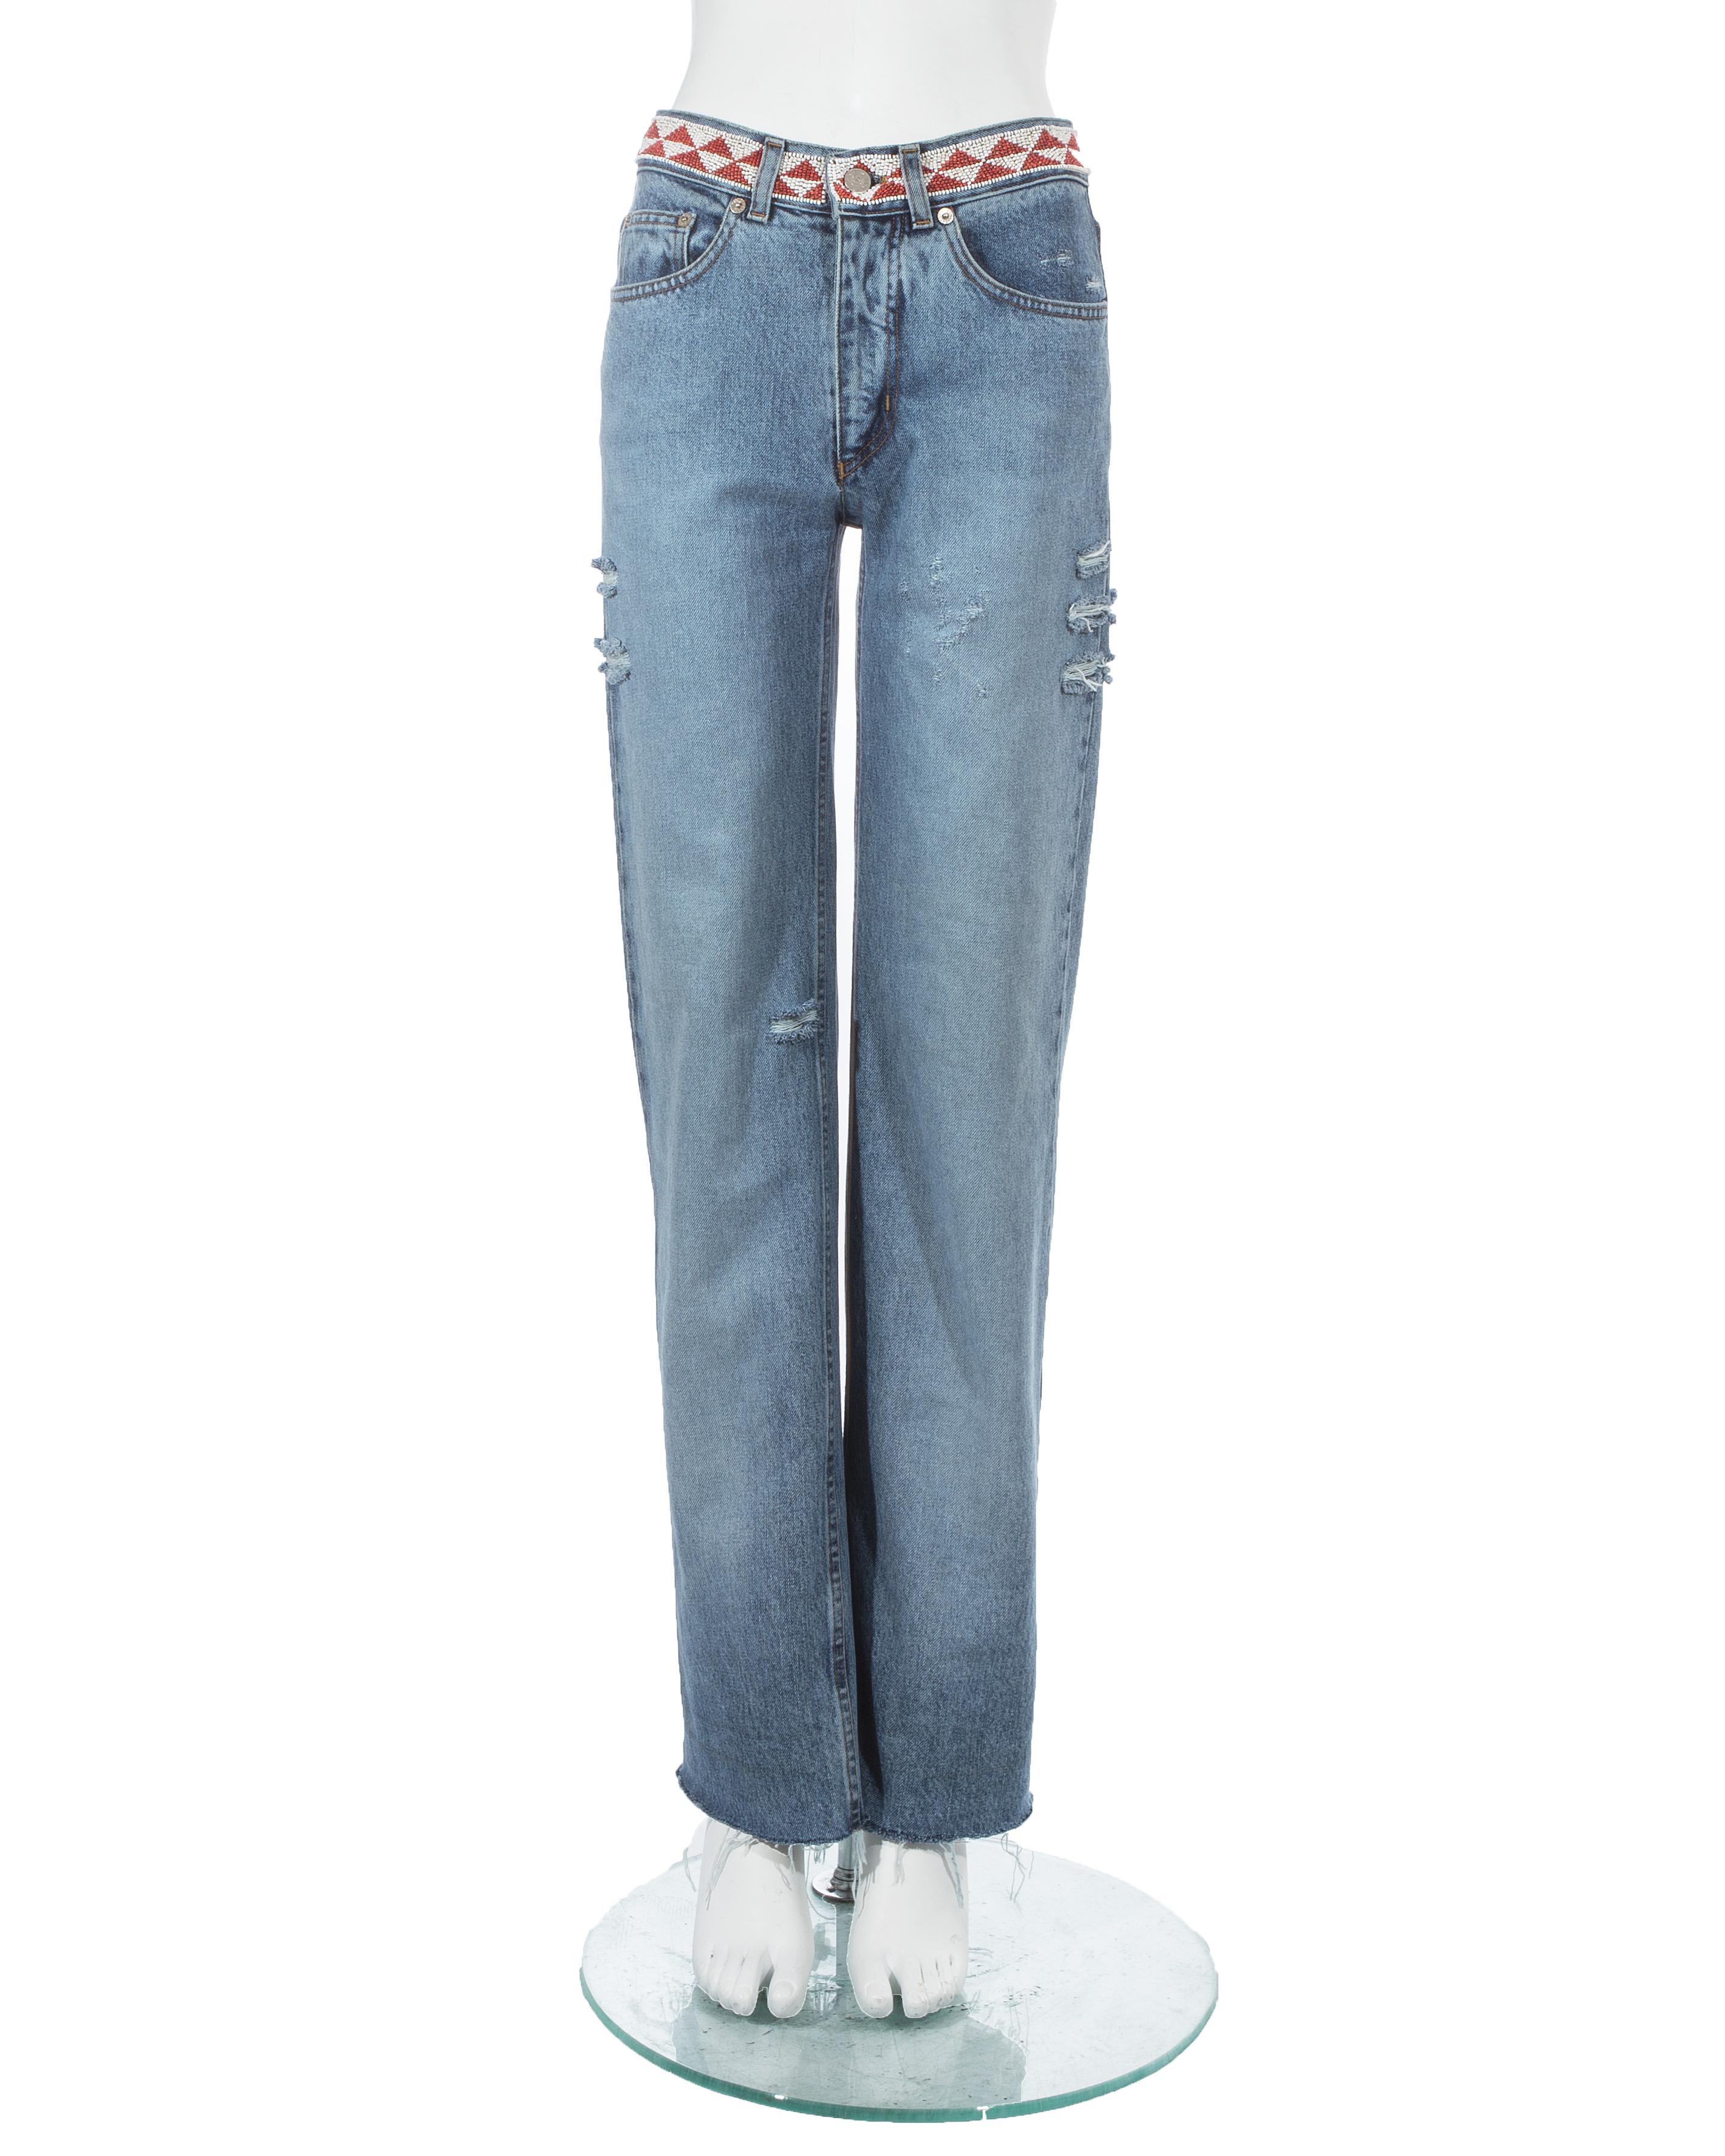 Gucci by Tom Ford light blue denim jeans with beaded waistband

Spring-Summer 1999